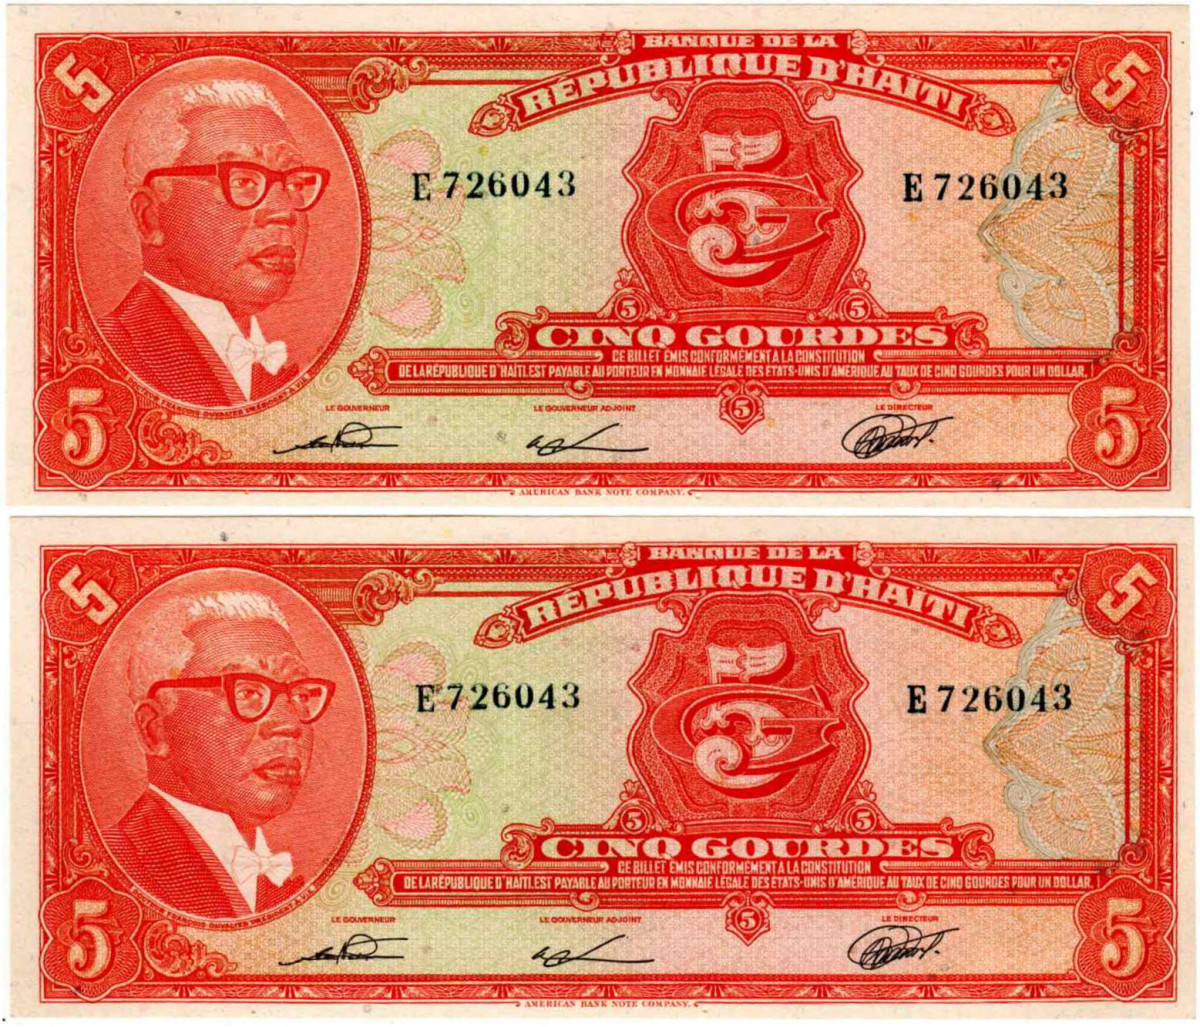 Rare pair of notes produced by the American Bank Note Company with duplicated serials numbers discovered in Port-au-Prince, Haiti in 1986.